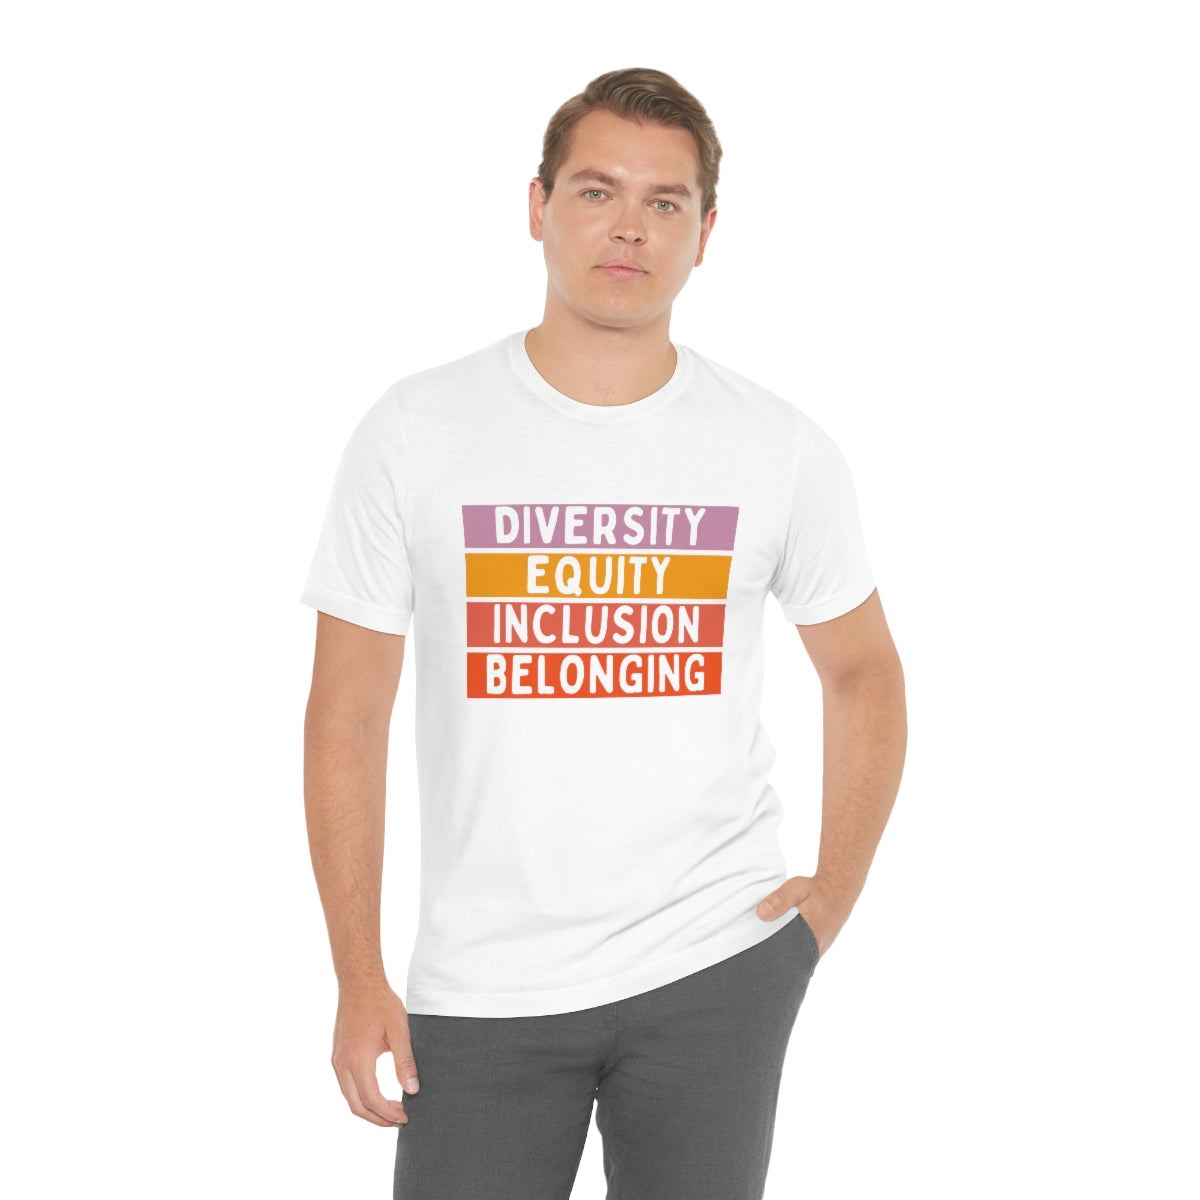 Diversity Equity Inclusion Belonging Graphic T shirts, DEIB, DIB, Shirts for HR Professionals and dei Leaders